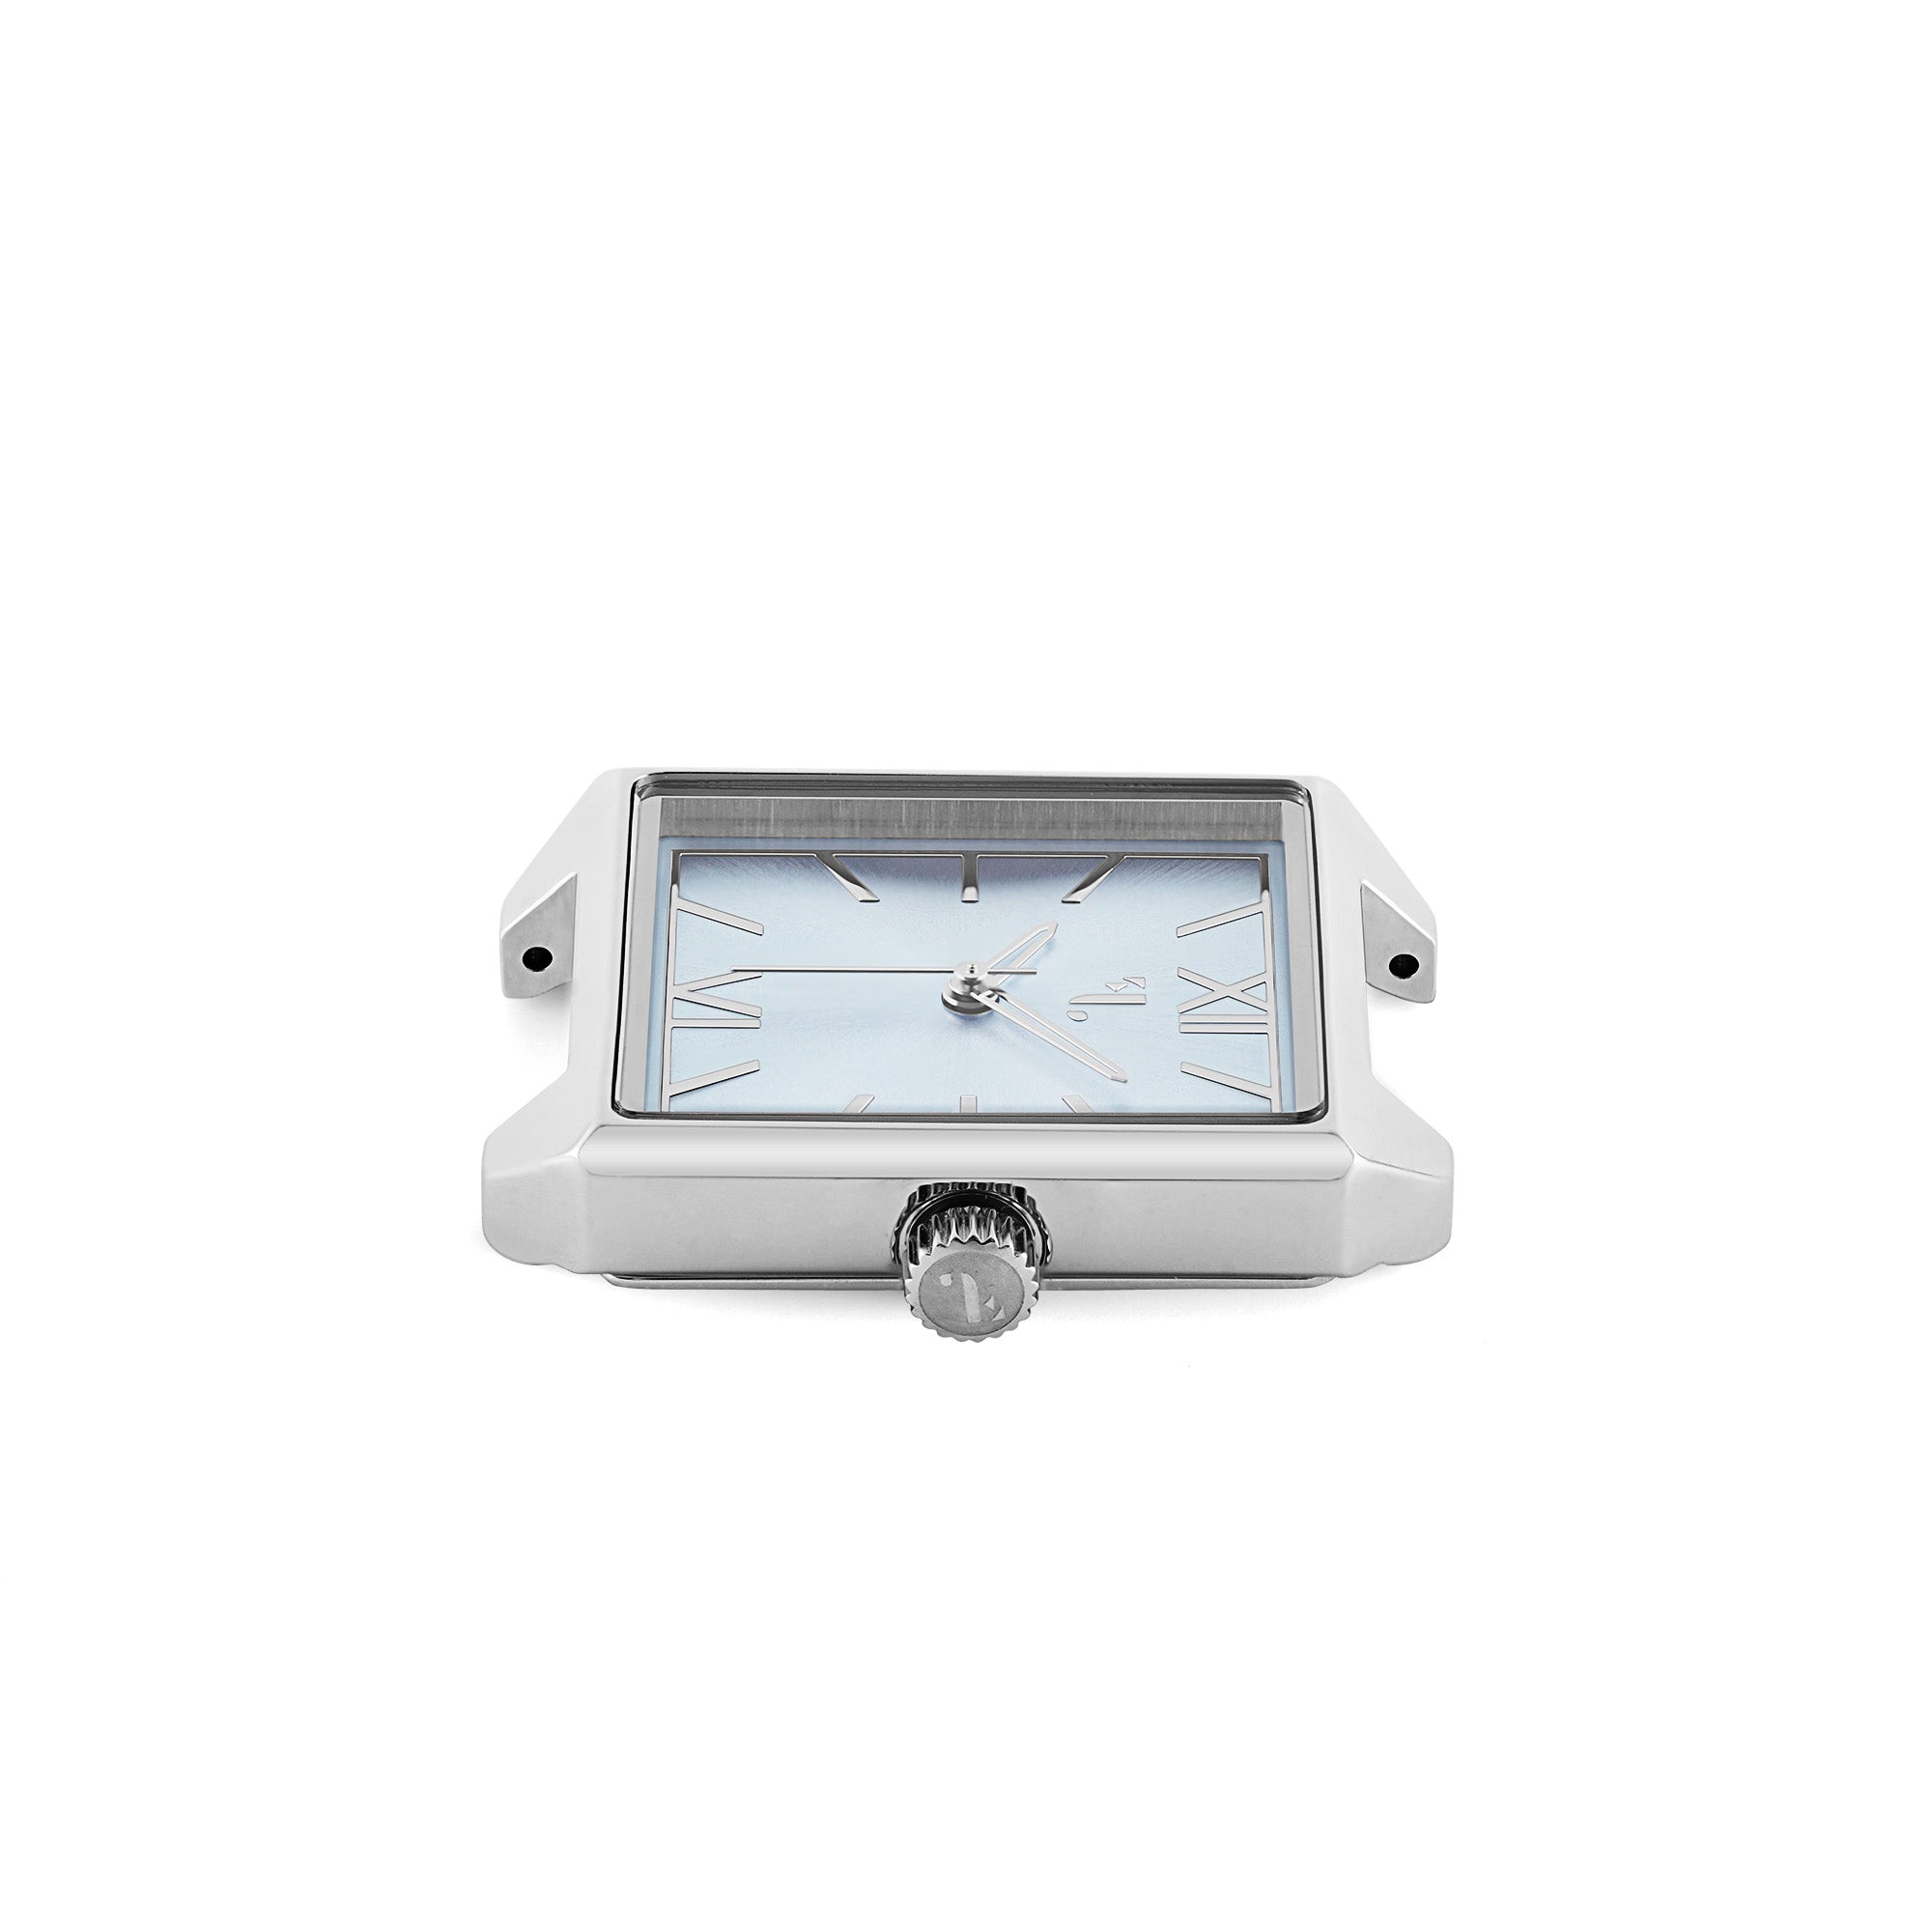 Pacific heights watch. It is made of a square silver case and a baby blue dial. It is the ideal watch for a women, with its three hands, its quartz mechanism, its water resistance and its 2 year warranty.